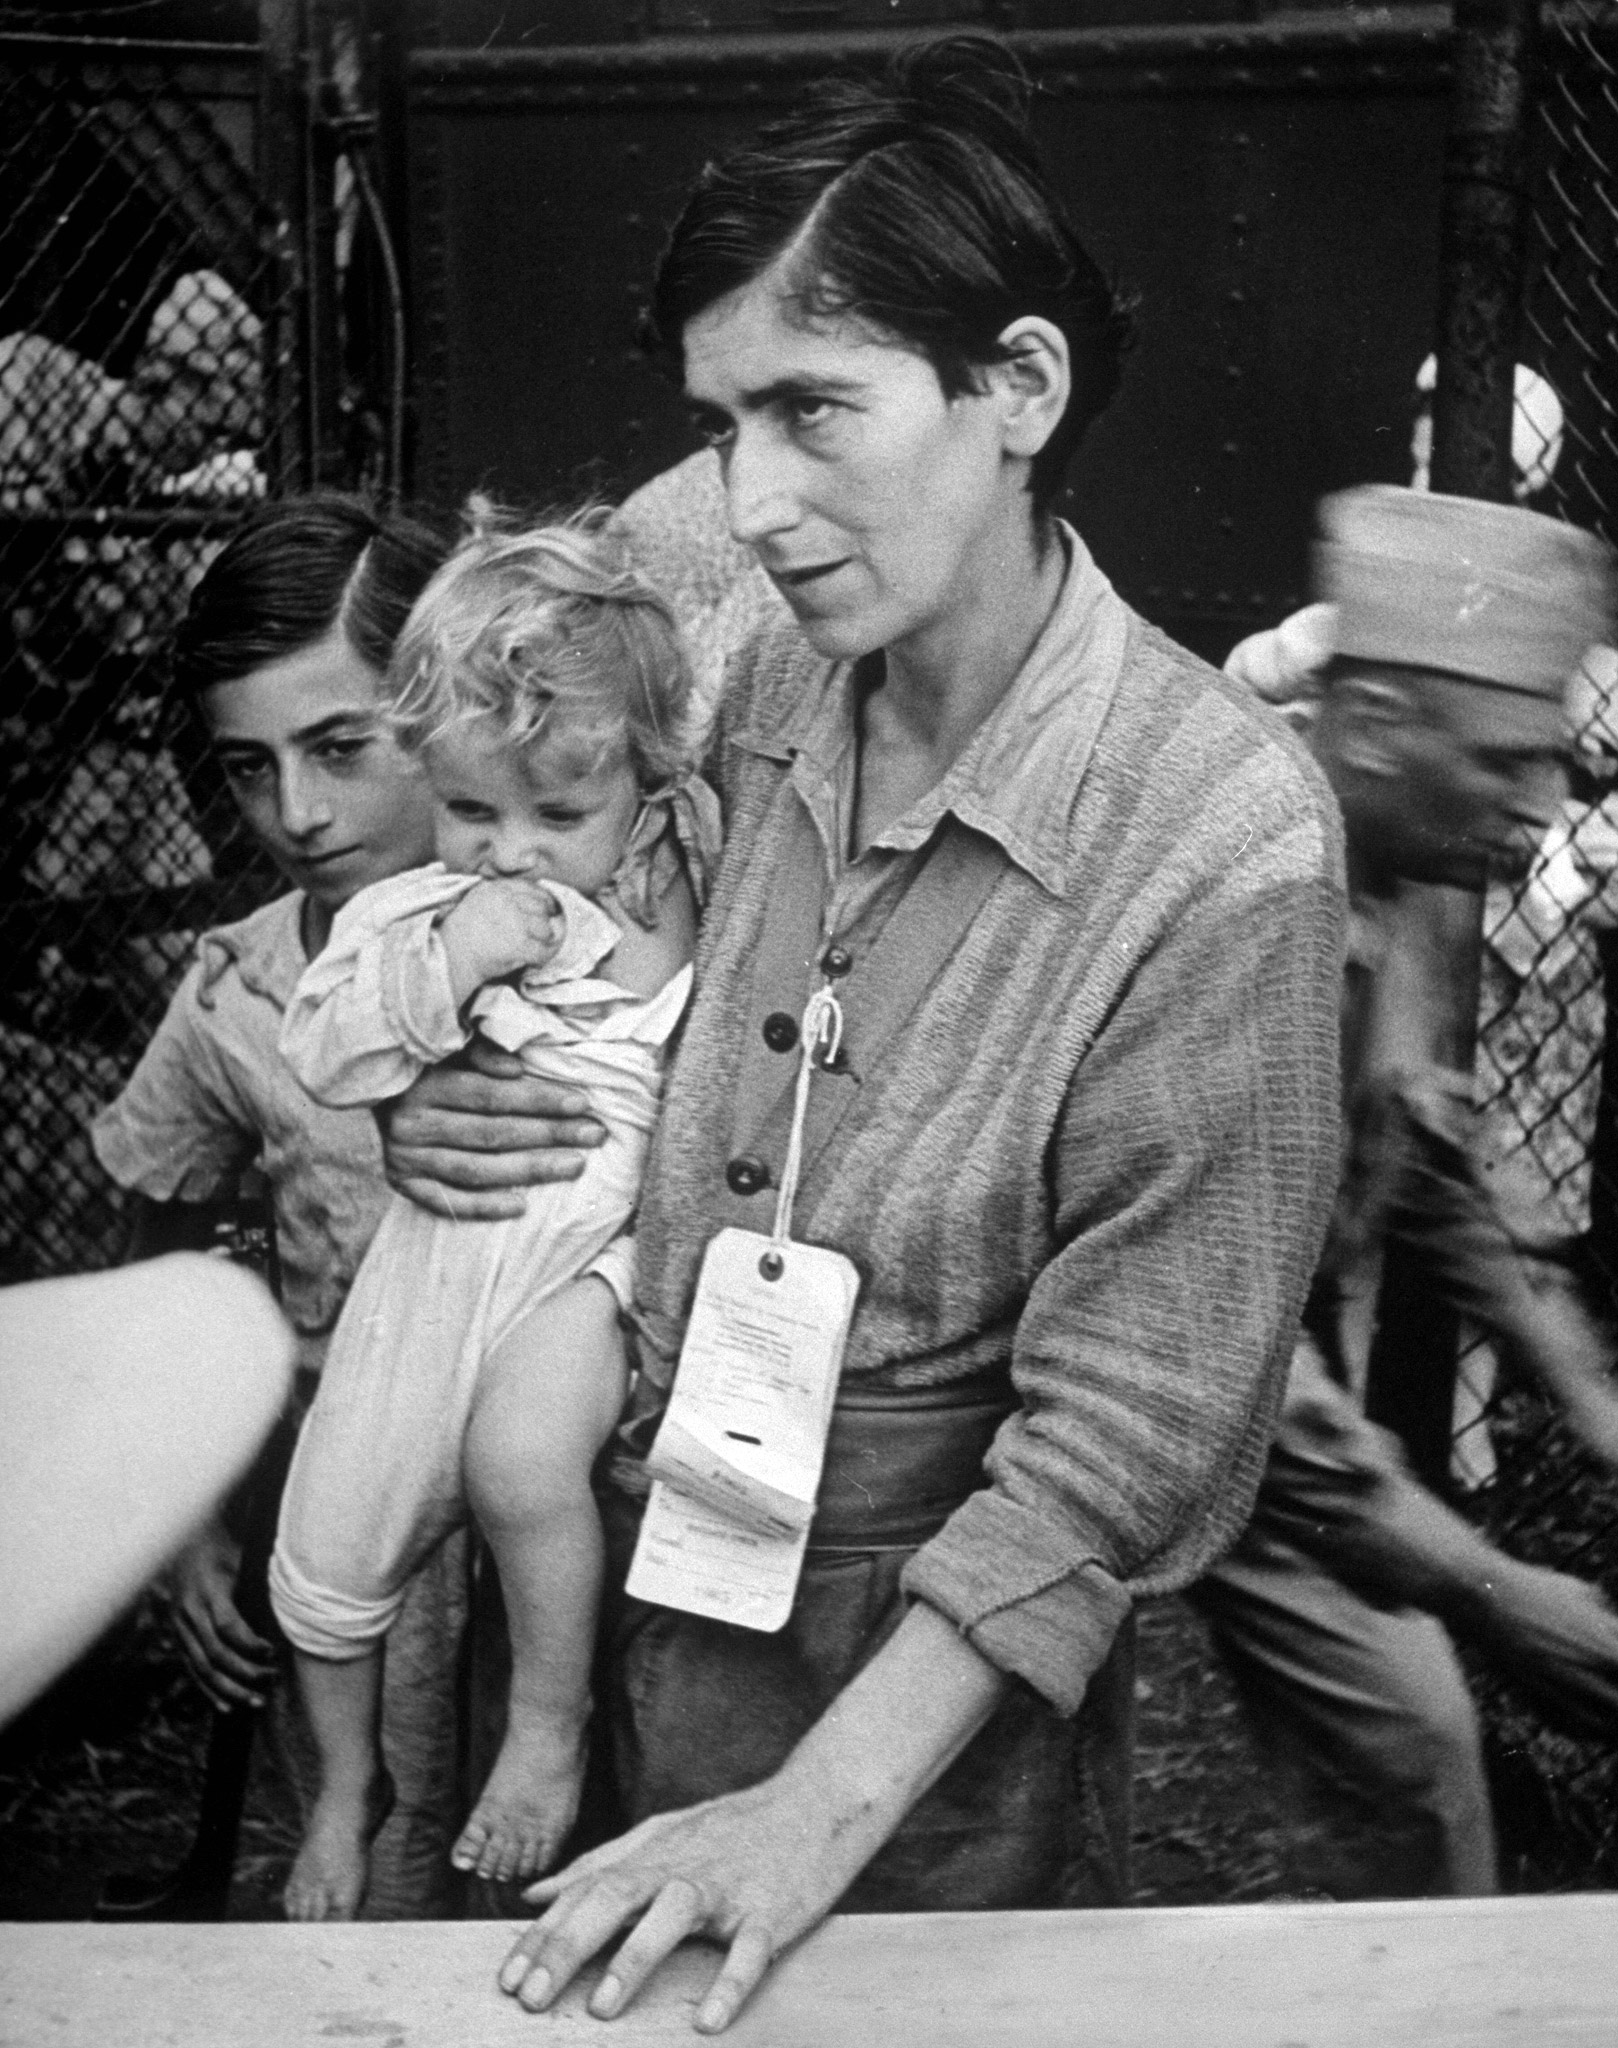 Swiss Jew Eva Bass, formerly a nightclub singer in Paris, entering refugee camp at Fort Ontario, with her children Yolanda and Joachim, whom she carried on a sixty-kilometer trek through the fighting lines to reach American transport ship Henry Gibbins. 1944.